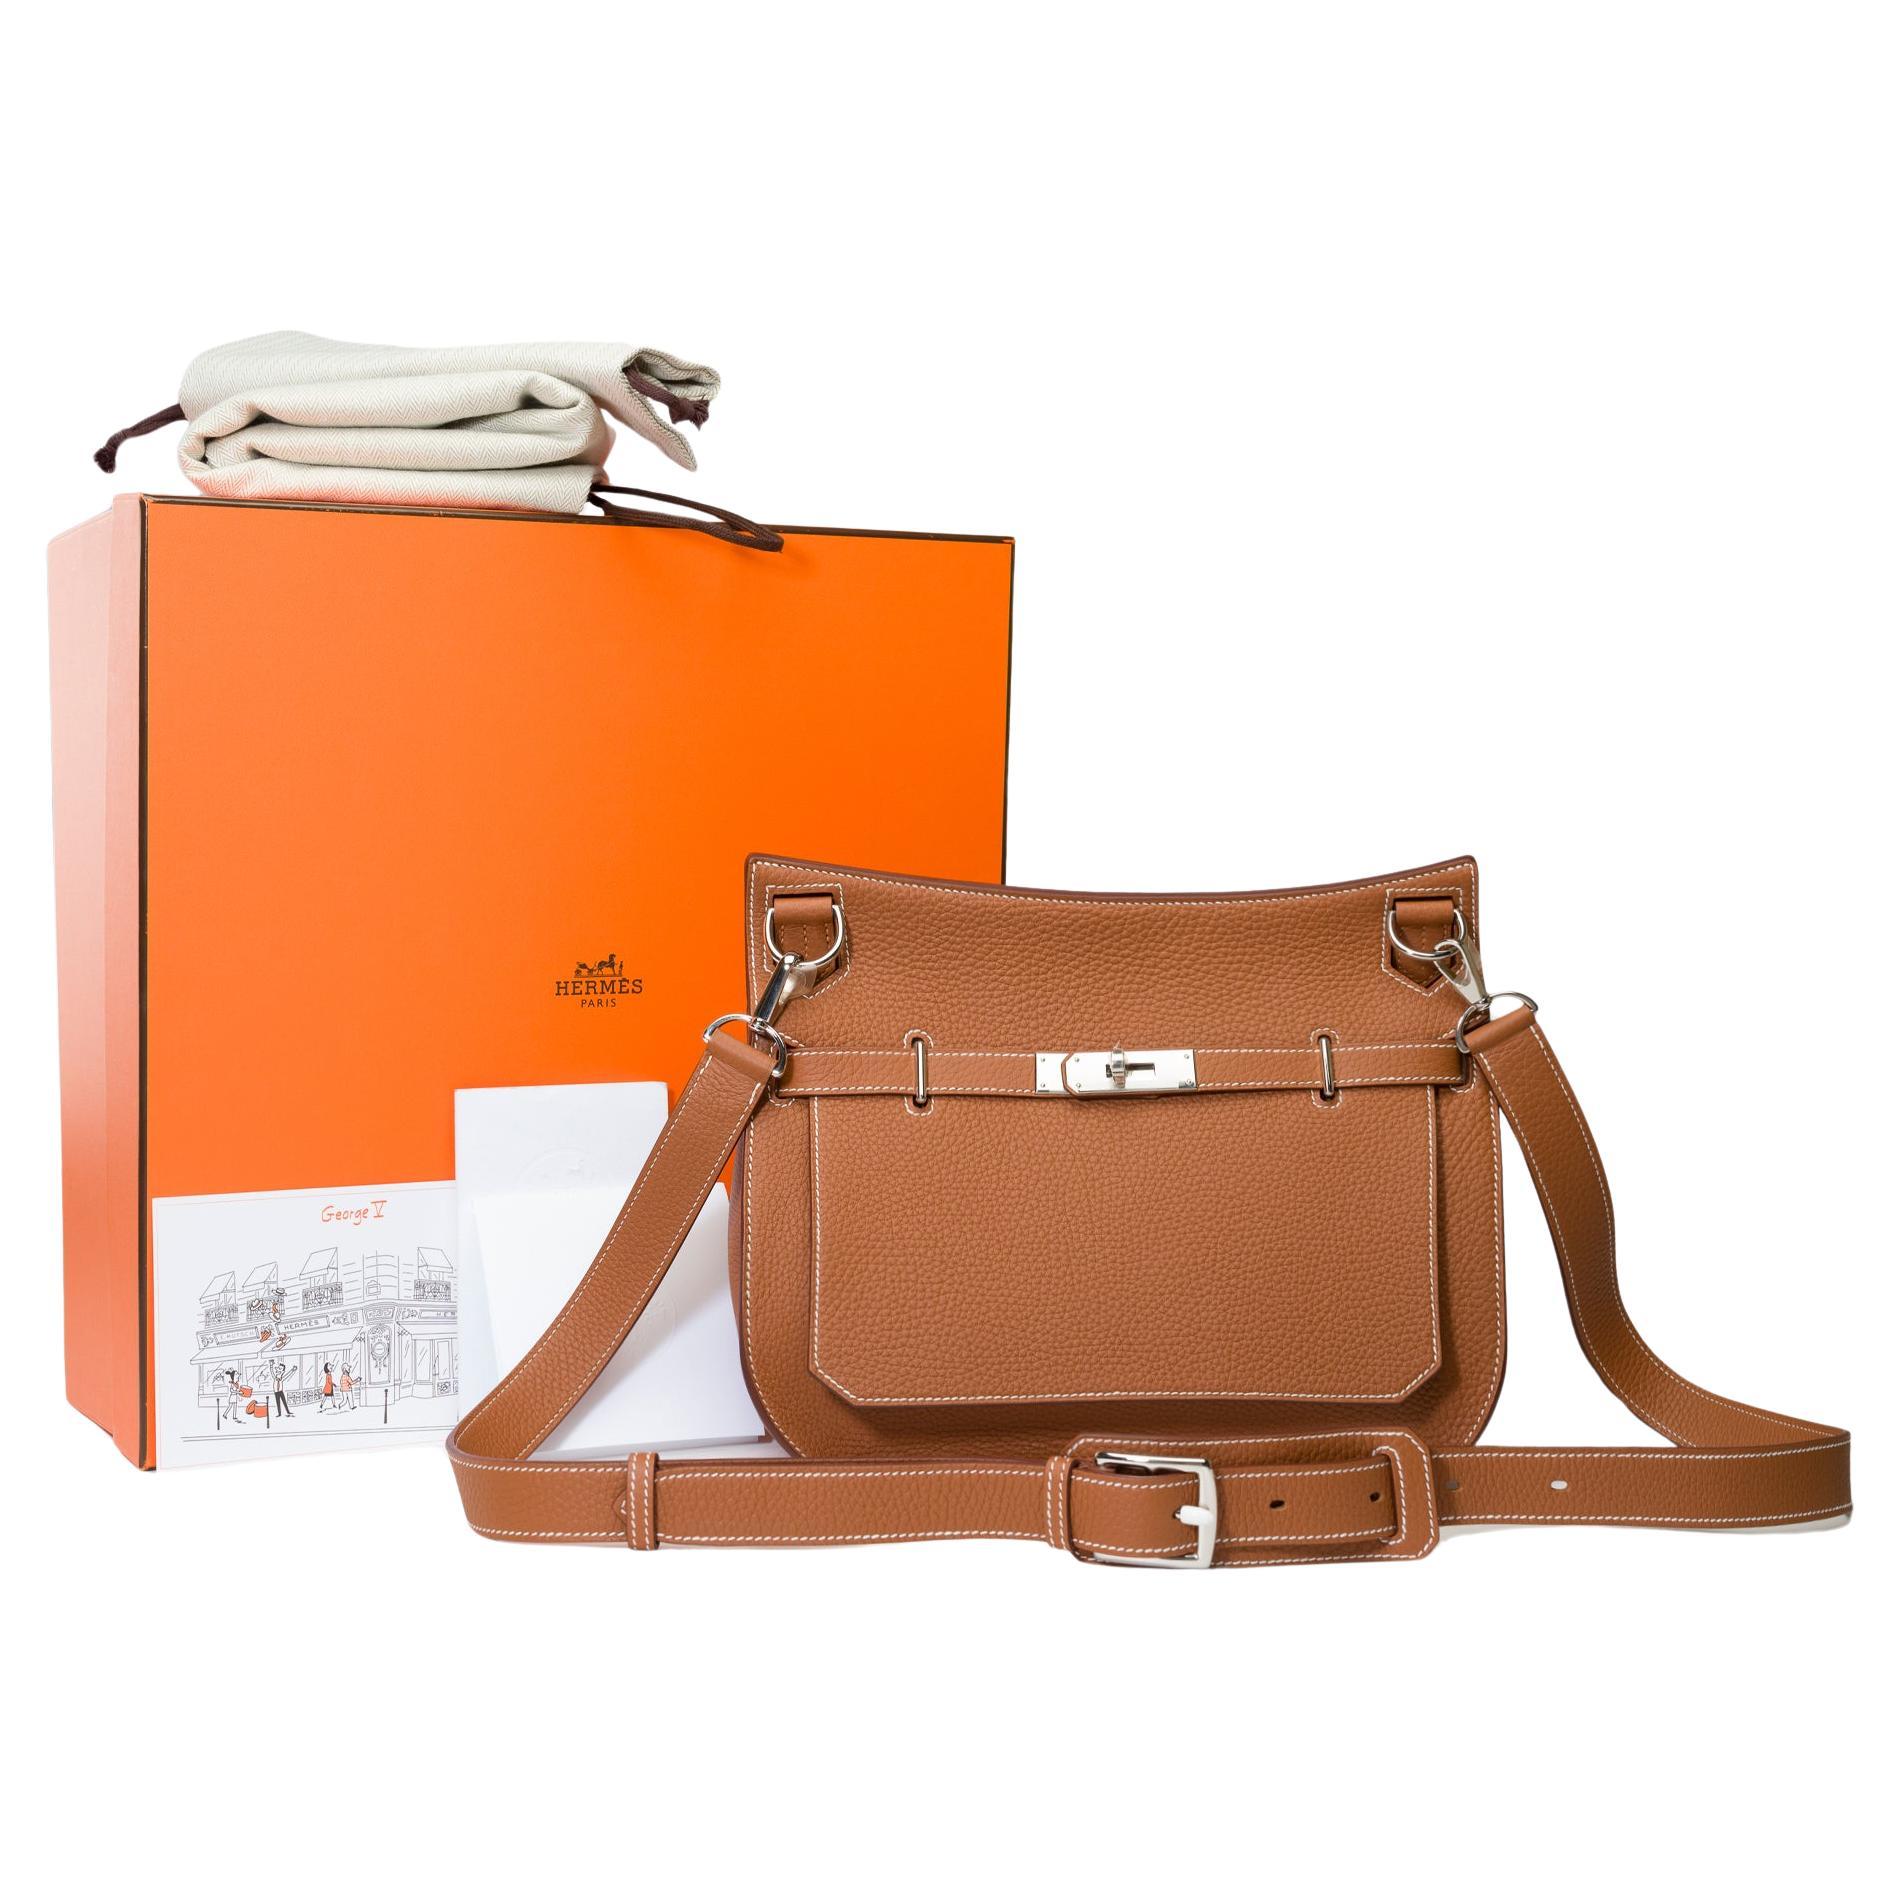 New Hermès Jypsière 28 crossbody bag in Gold Taurillon Clemence leather, PHW For Sale